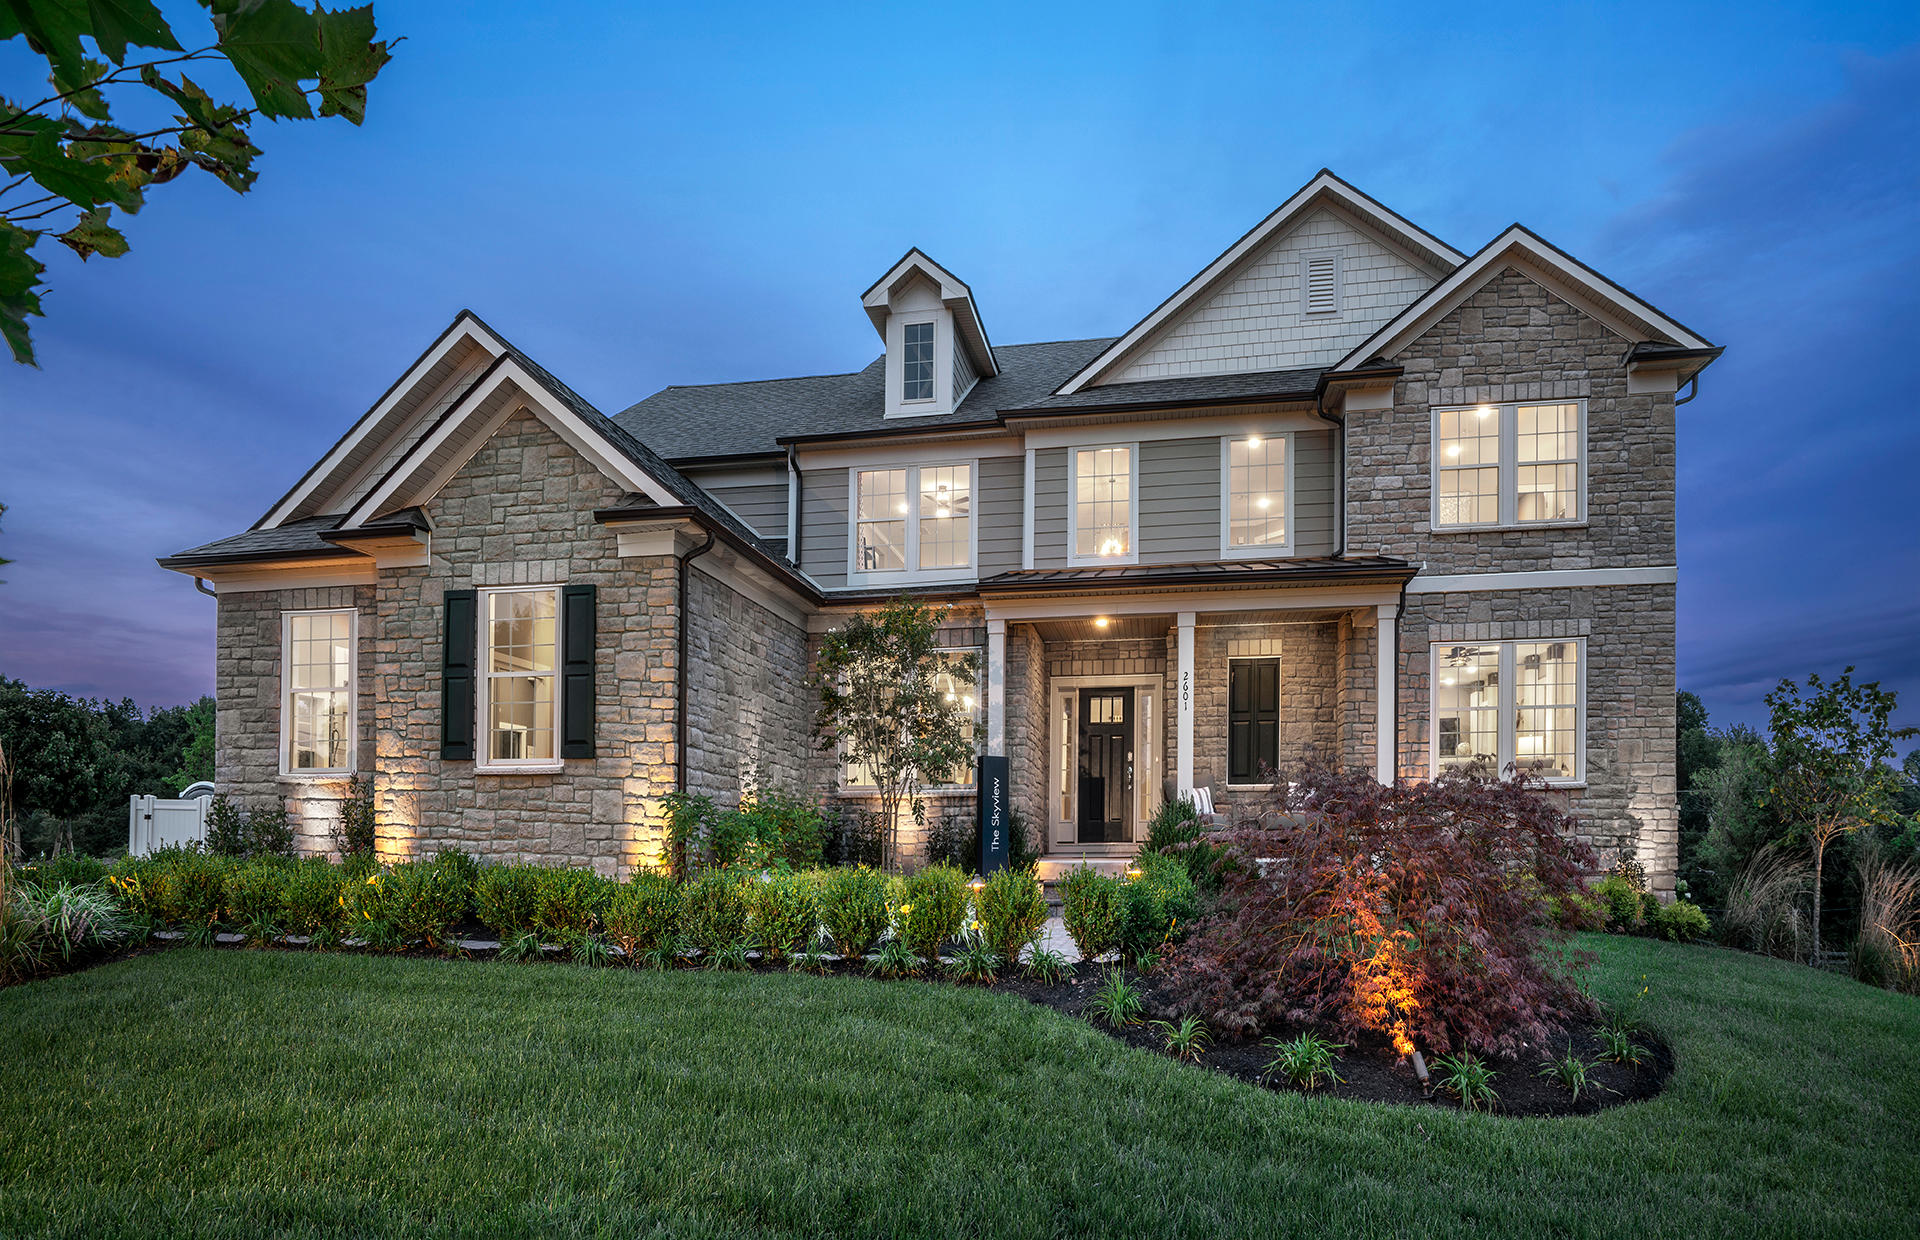 Whitehall Estates by Pulte Homes - Closed, Eagleville | Homes